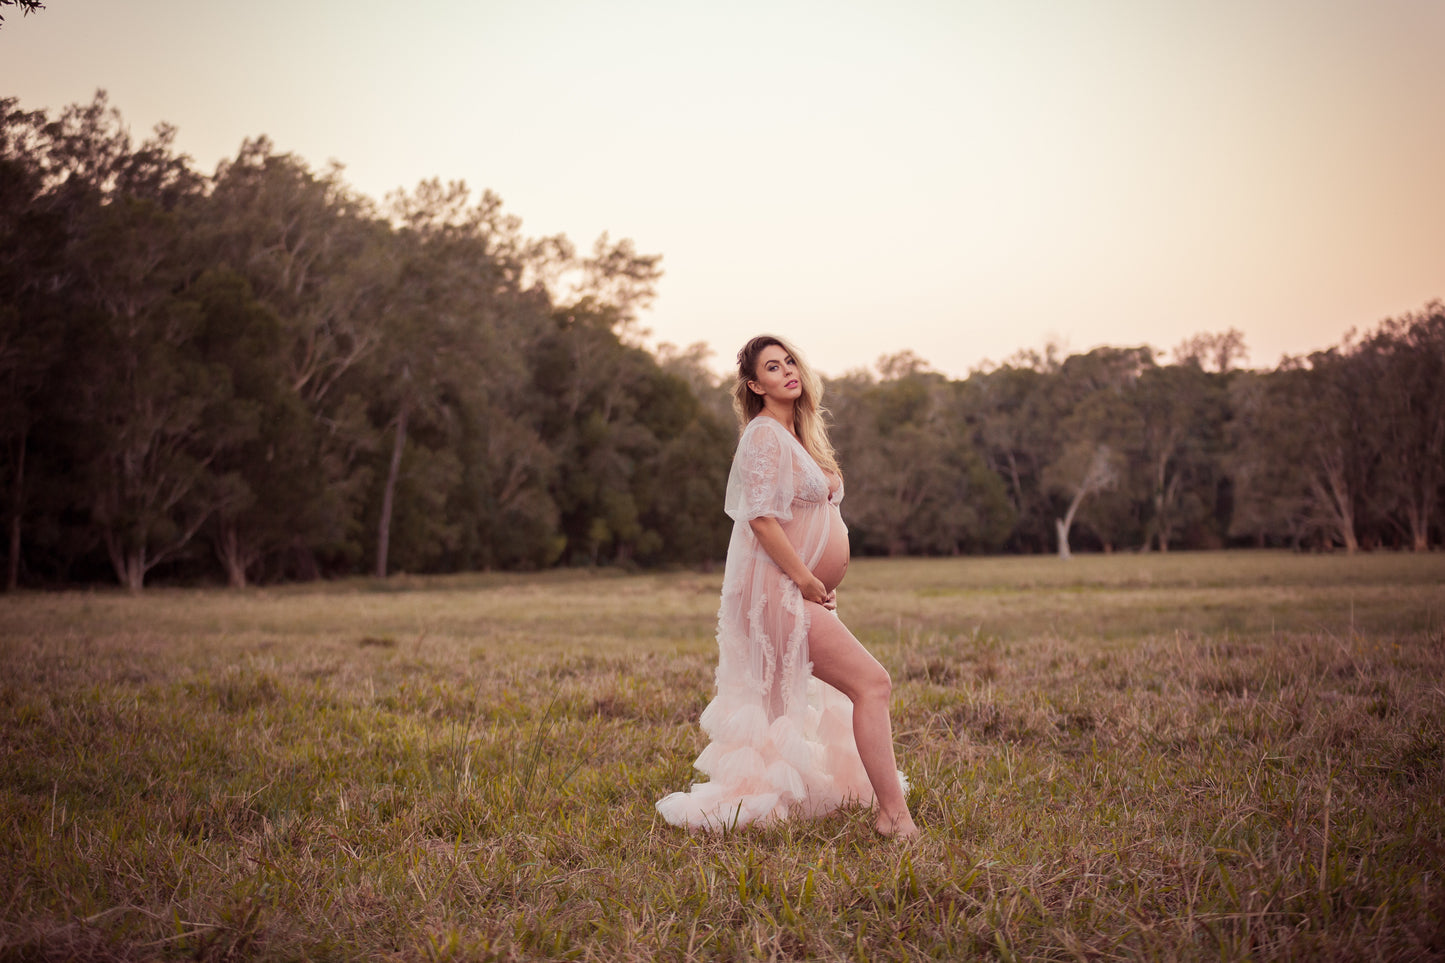 Blush Pink Lace Tulle Gown Dress for Maternity Photography Photo Shoot